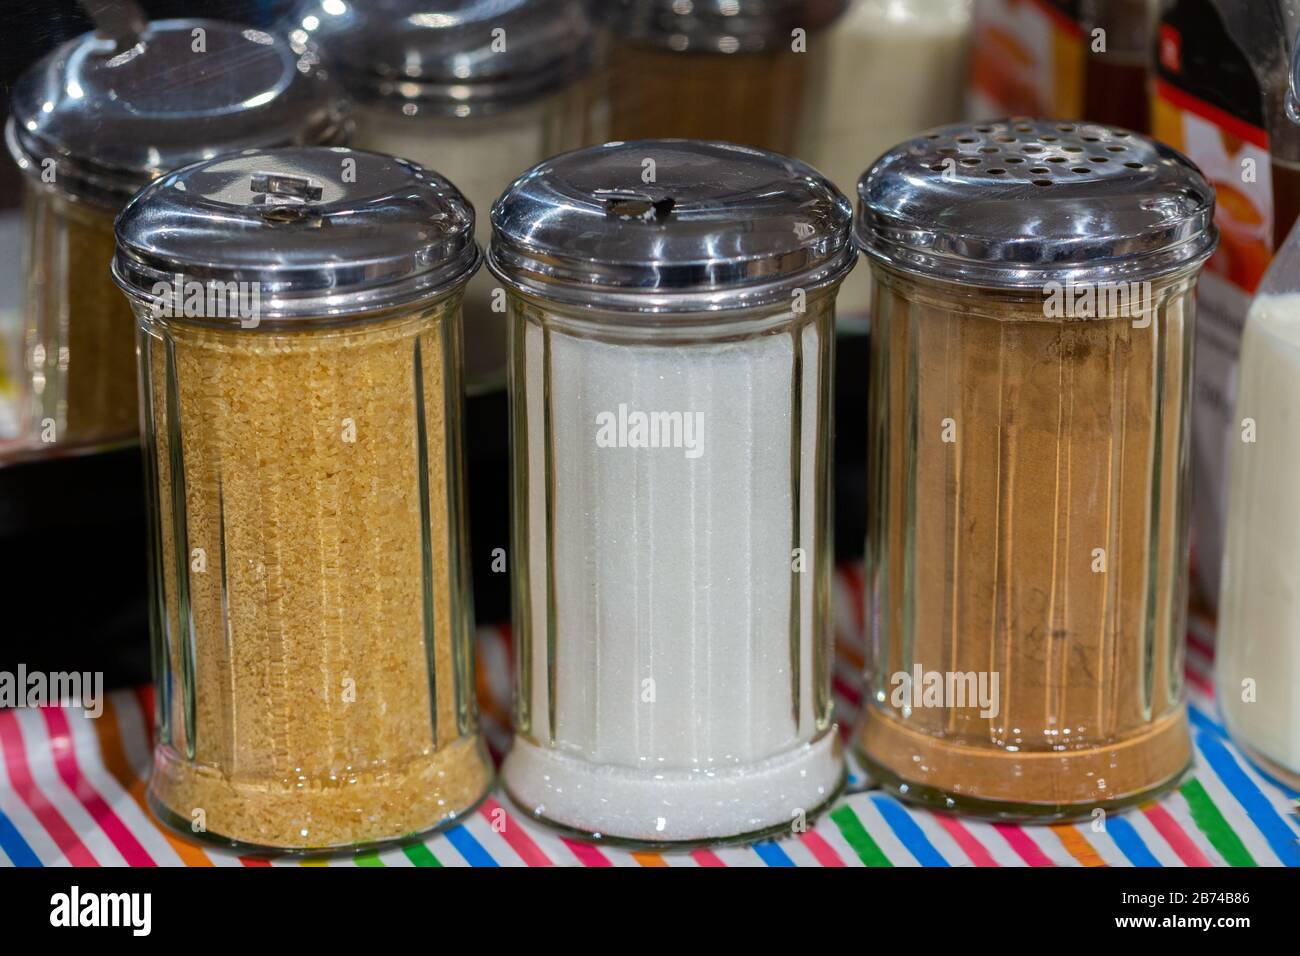 Three glass jars with metallic top filled with white sugar, brown sugar and cinnemon. For sweetening or giving a special taste to hot beverages. Stock Photo